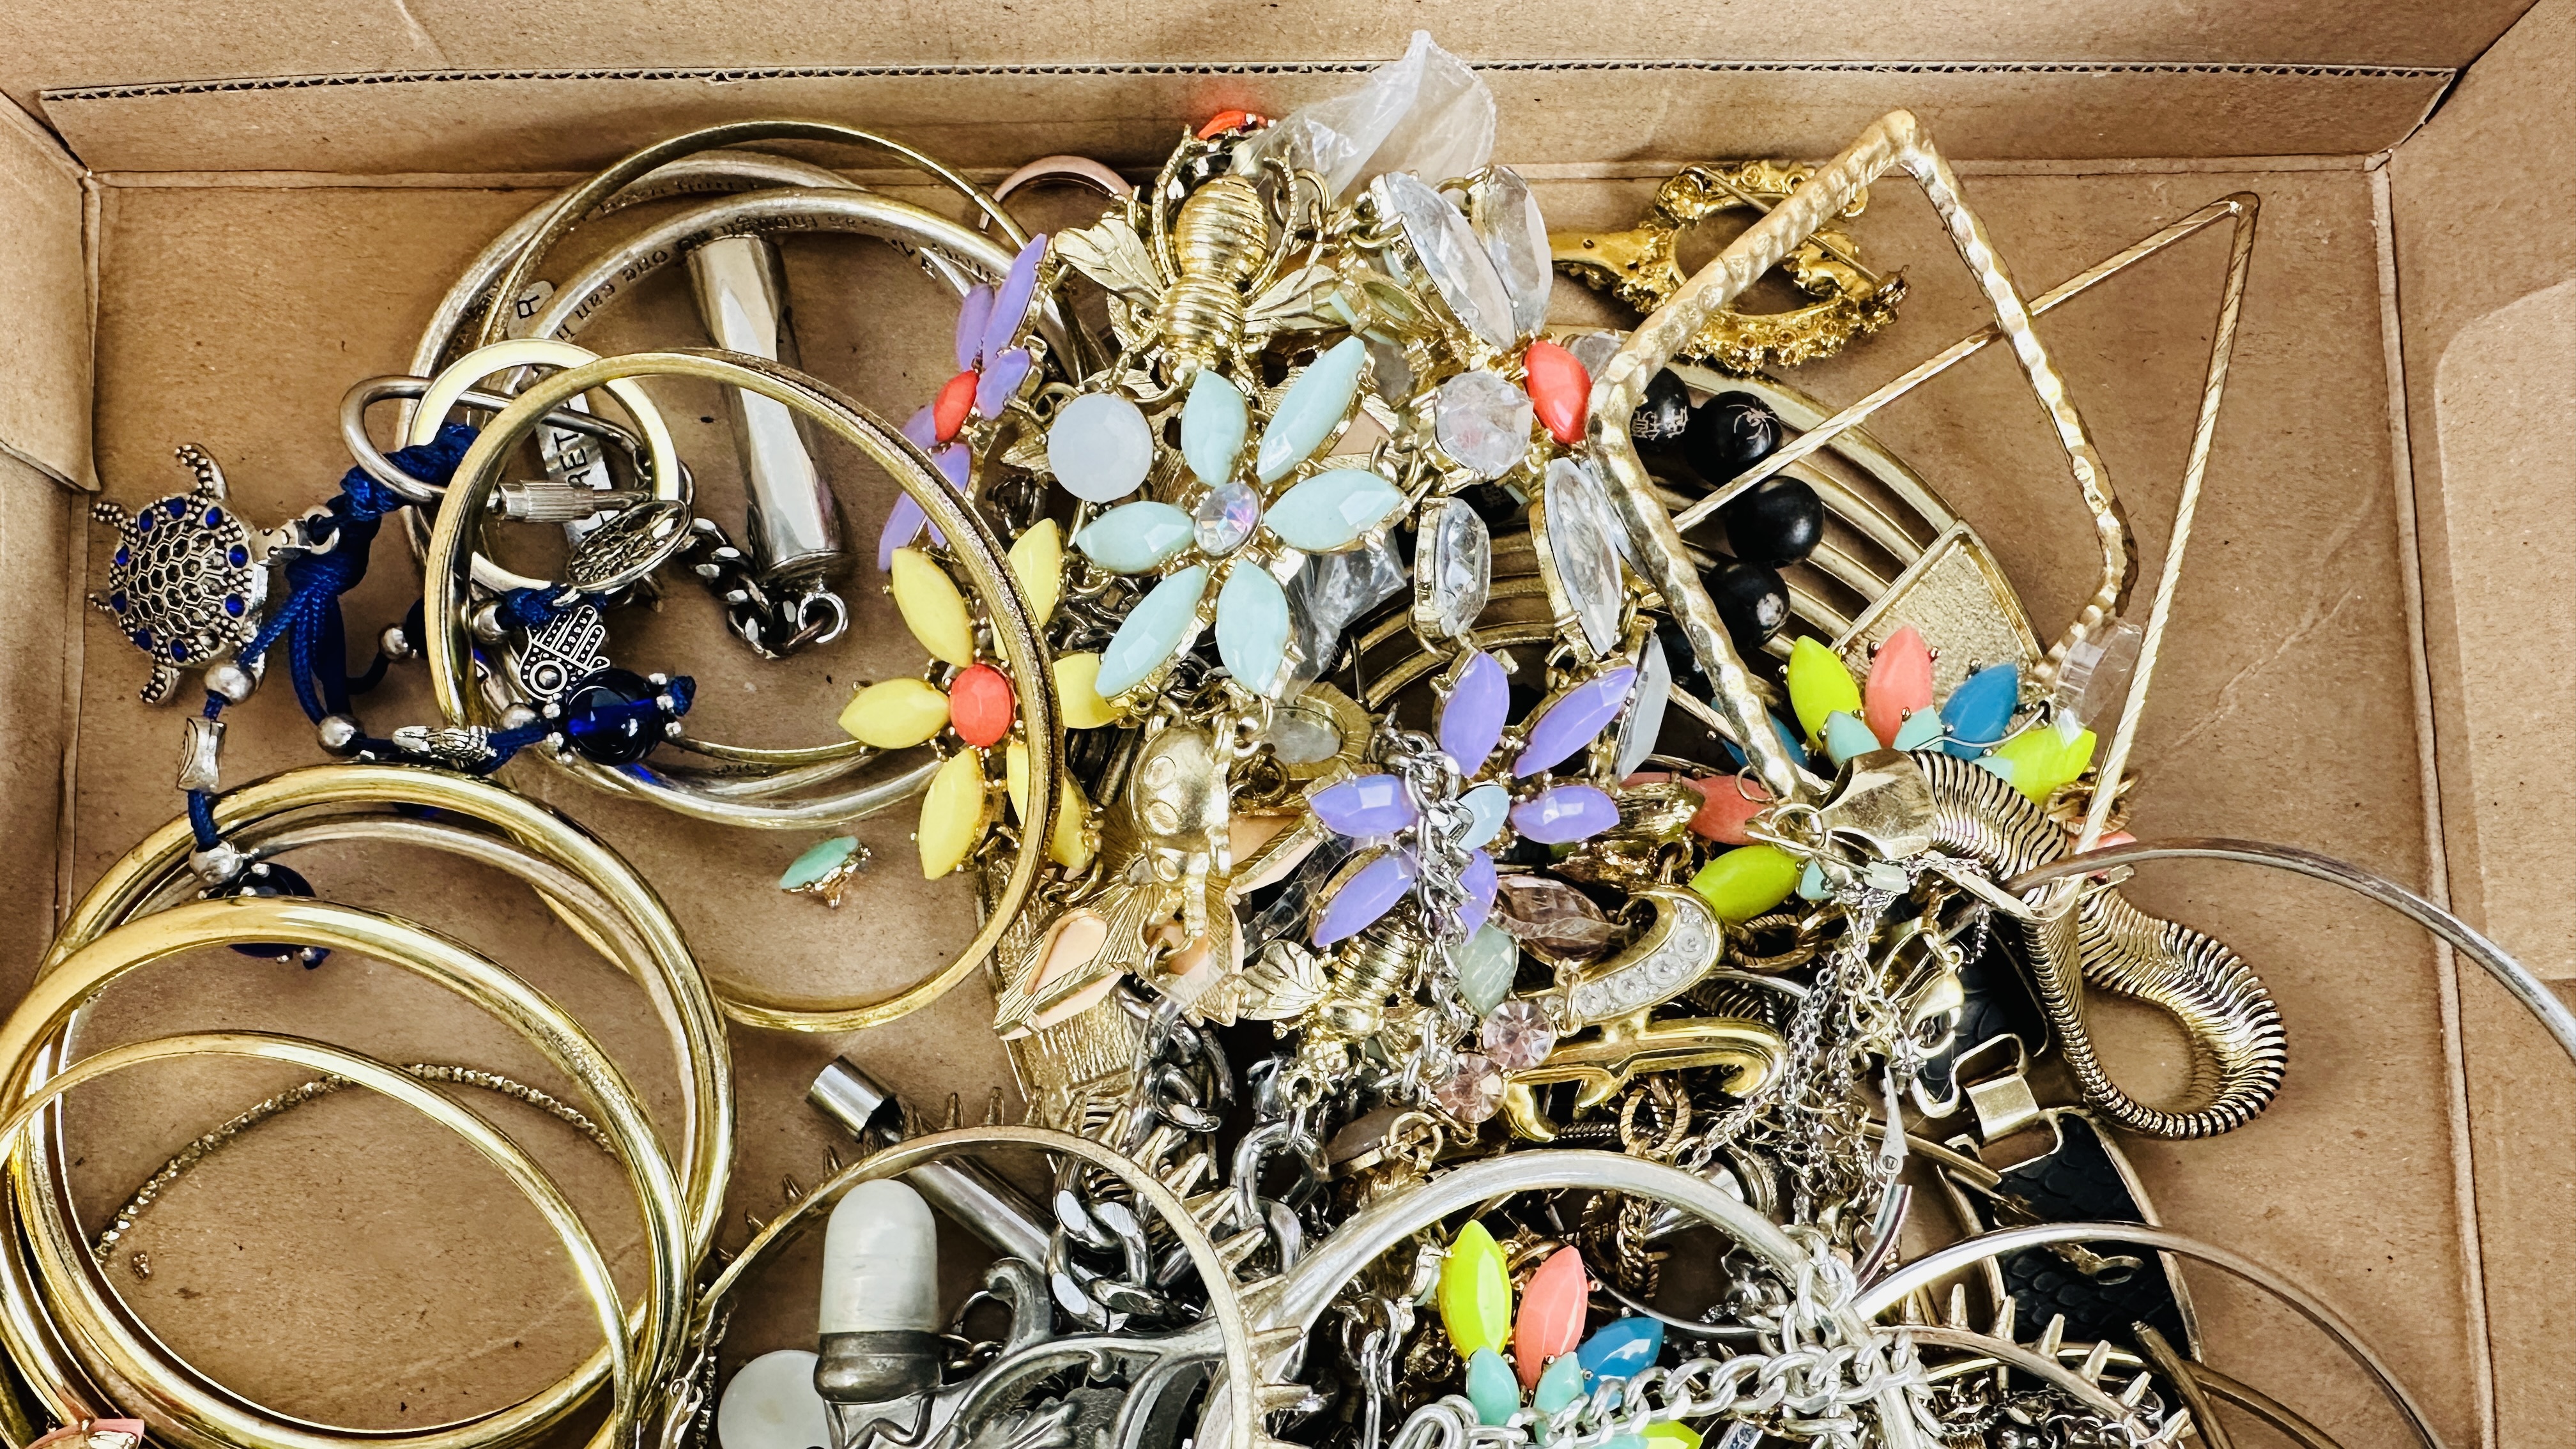 BOX MIXED COSTUME JEWELLERY INCLUDING NECKLACES, BANGLES, BRACELETS, BROOCHES, EARRINGS, ETC. - Image 2 of 6